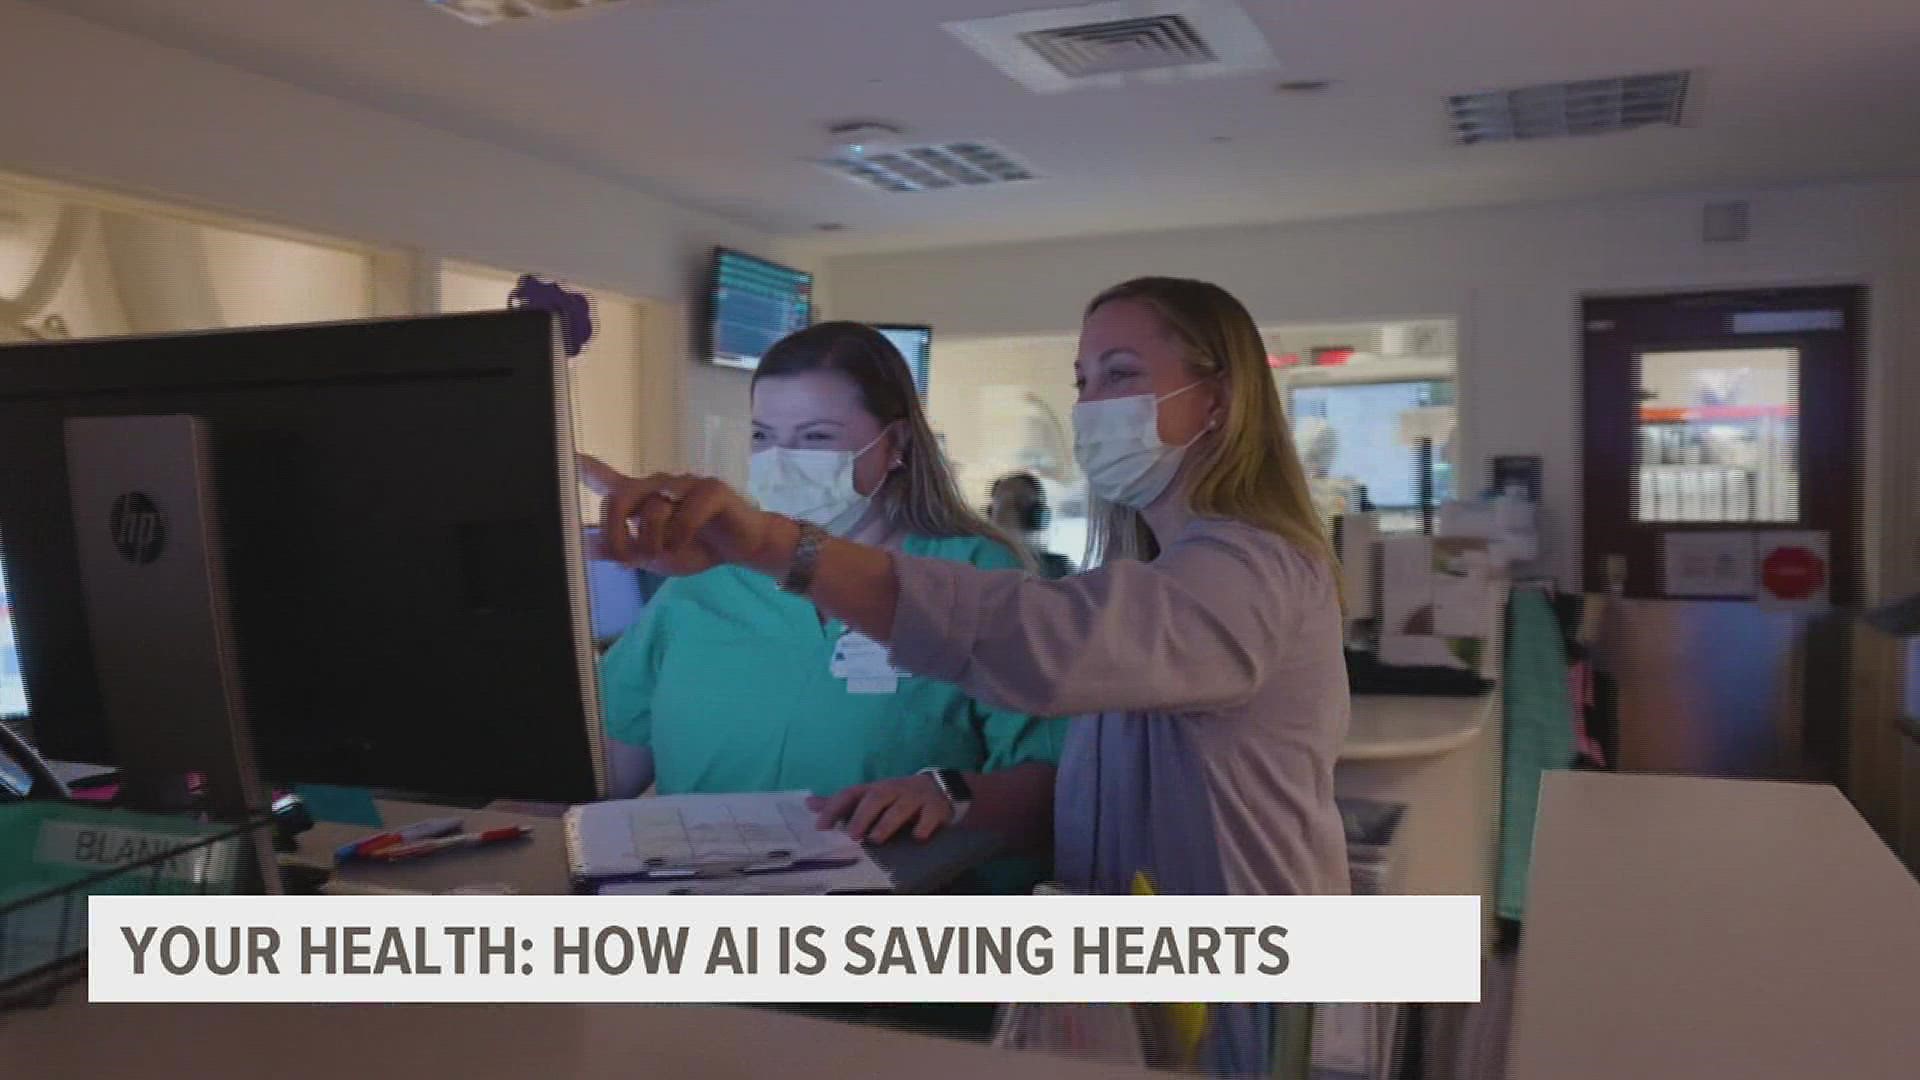 Over 6 million American adults suffer from heart failure. But now, doctors are harnessing AI technology to catch the problem before it's fatal.